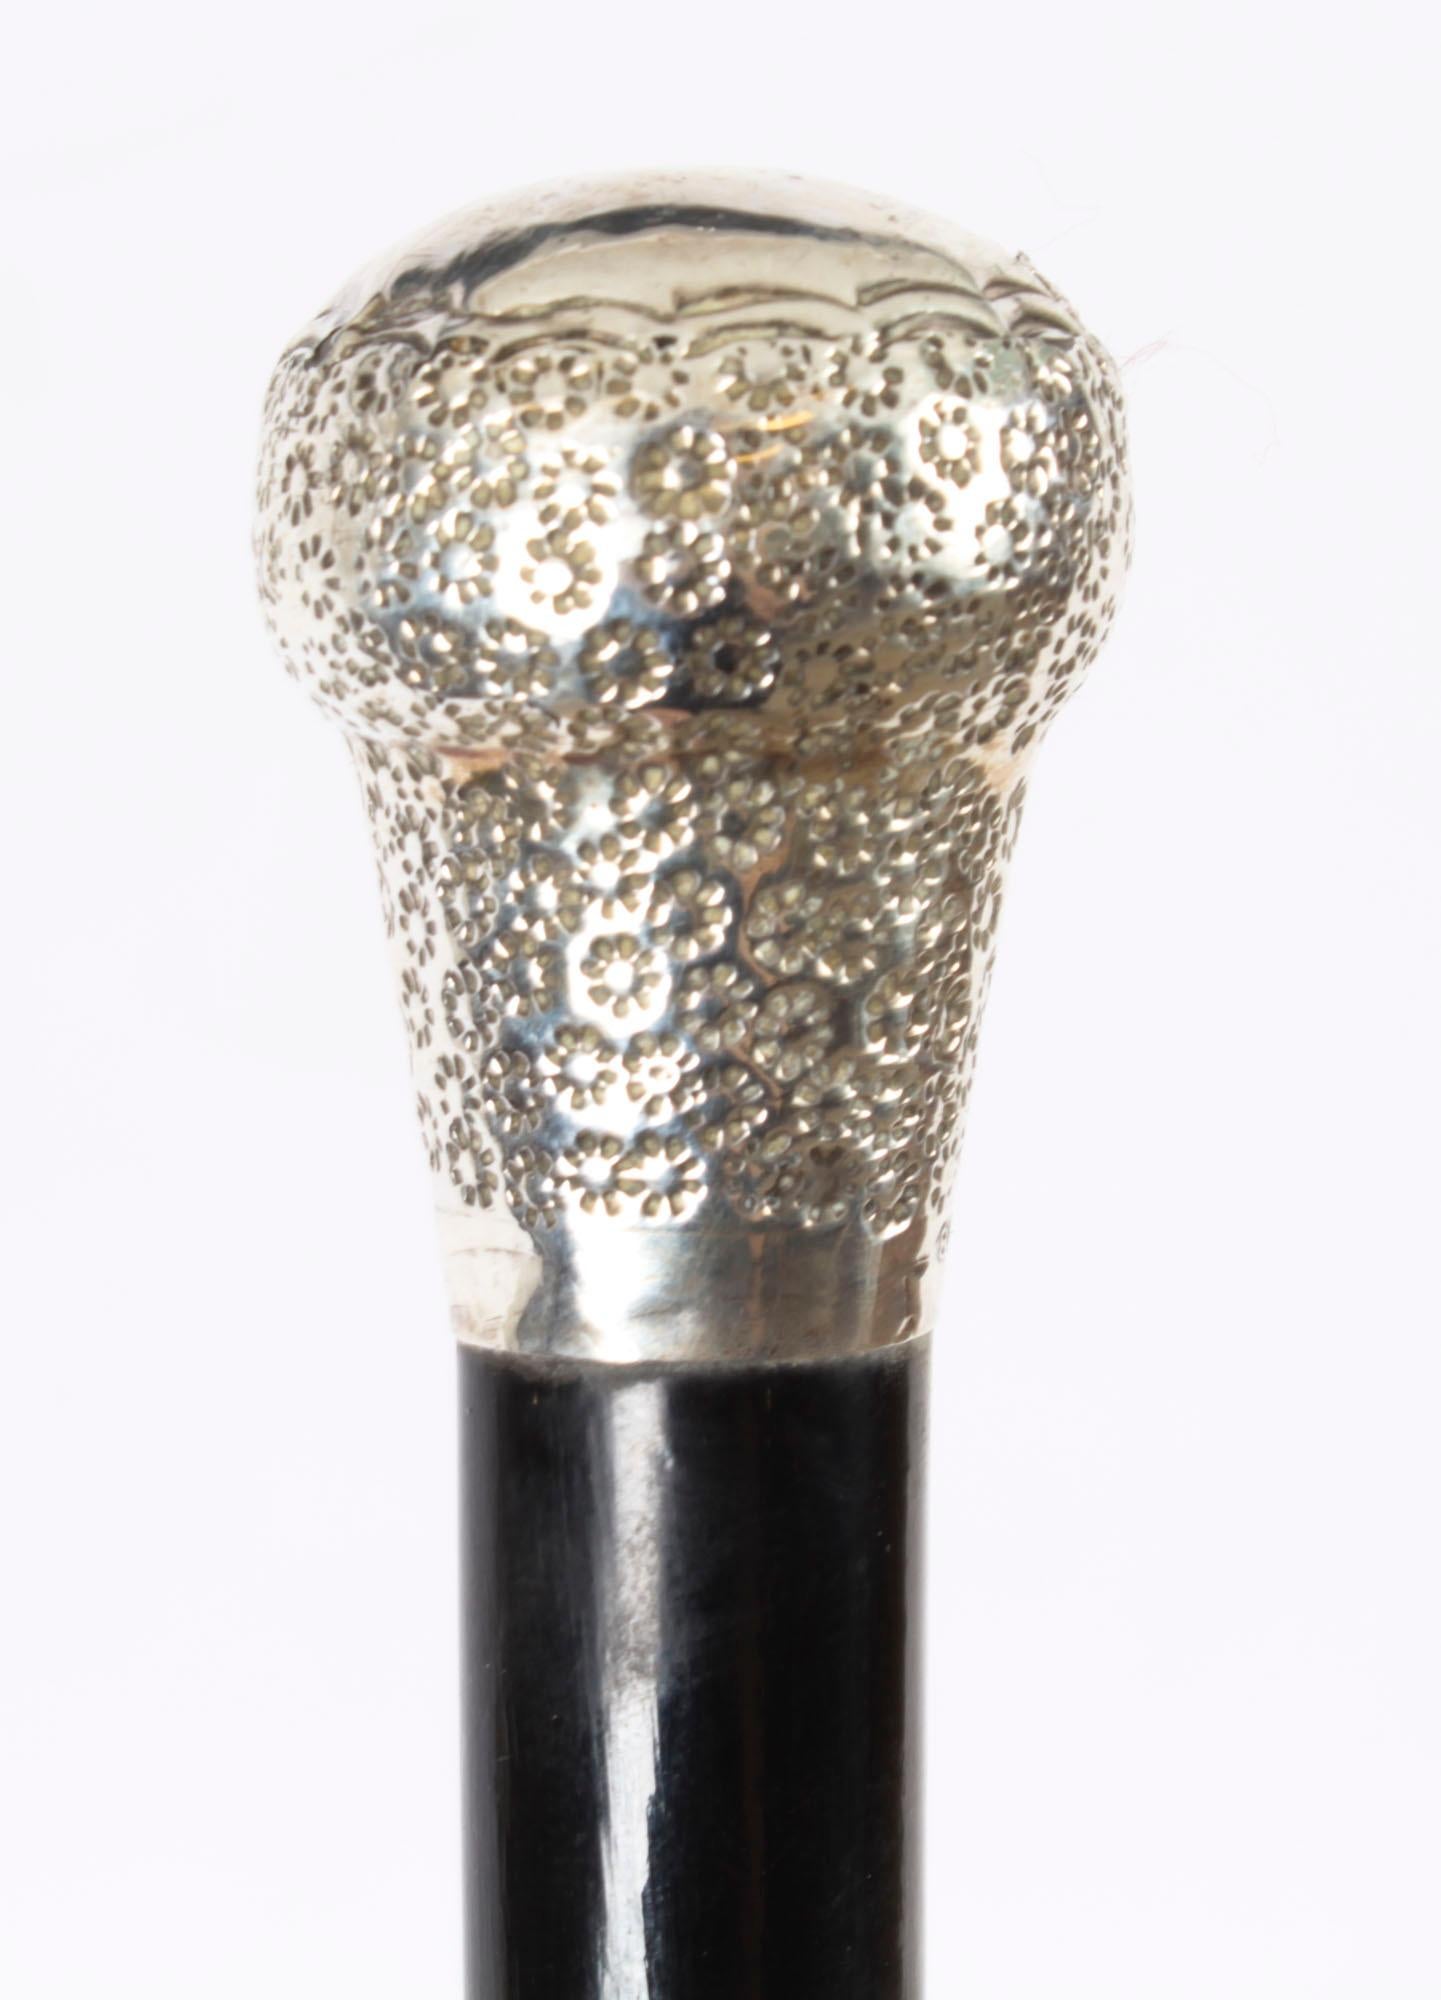 This is a beautiful antique sterling silver pommel walking stick bearing hallmarks for London,  dated 1883.

The striking stick features an ornate silver pommel having a profusely engraved circular flower like design and a vacant cartouche to top,